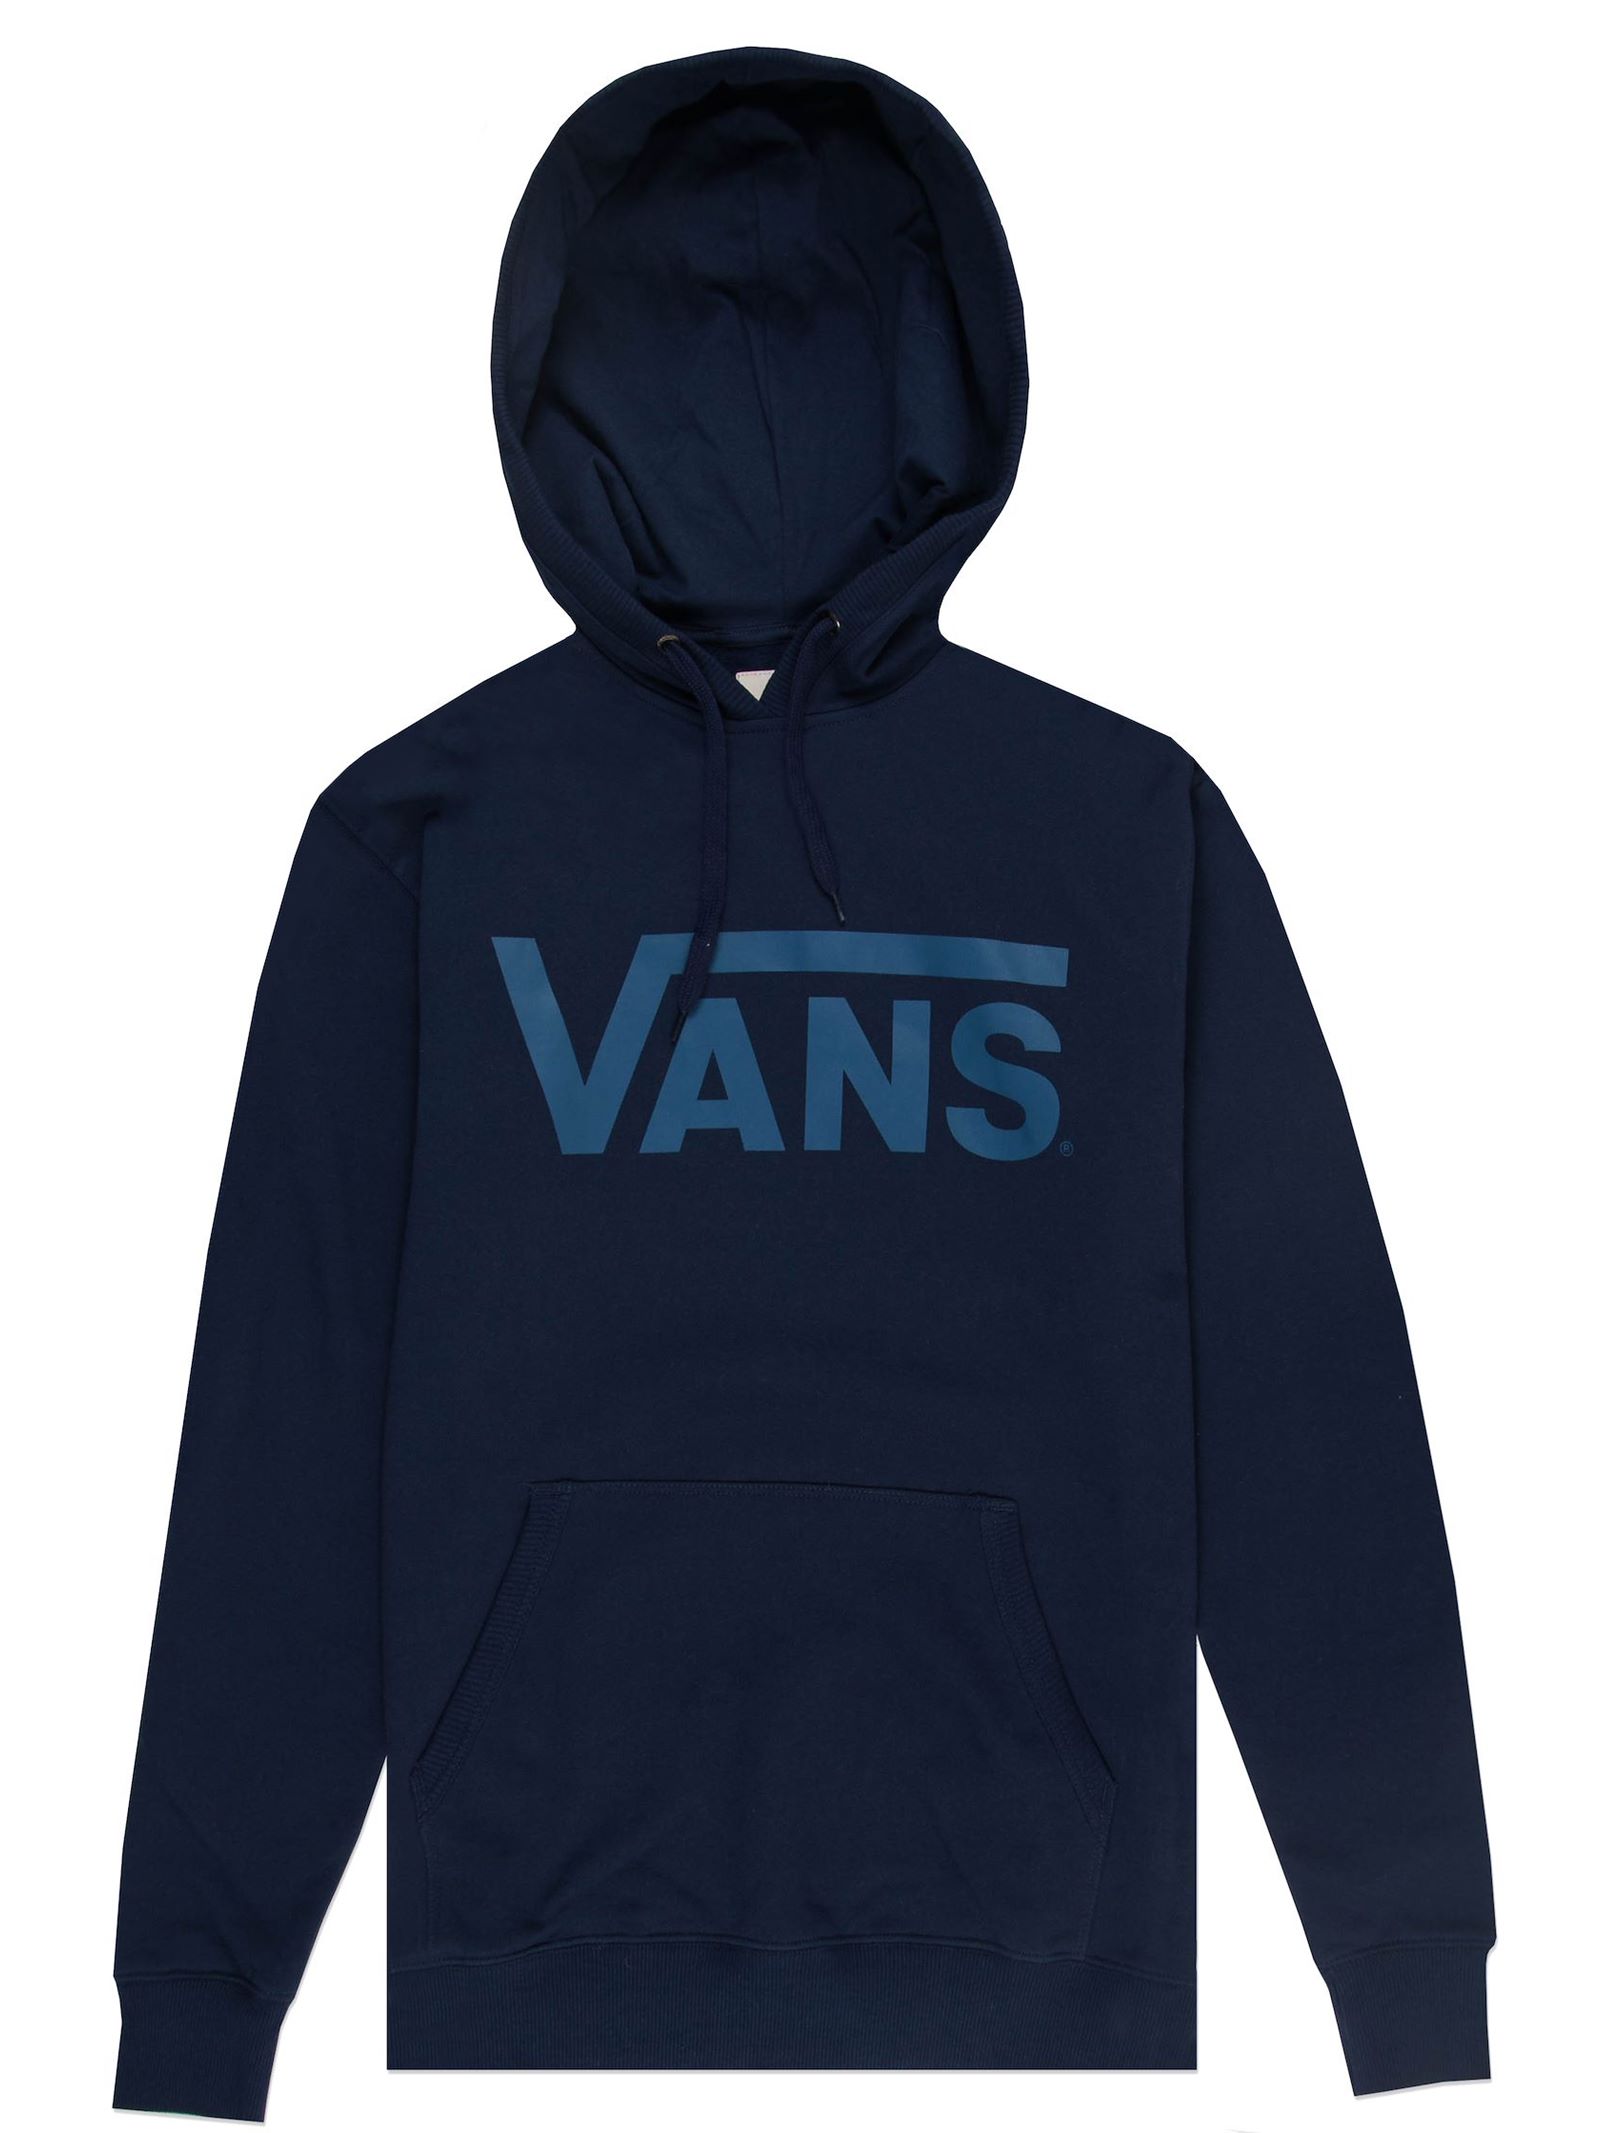 VANS Classic Pullover Hoodie in Dress Blues/Blue Ashes | Dapper Street